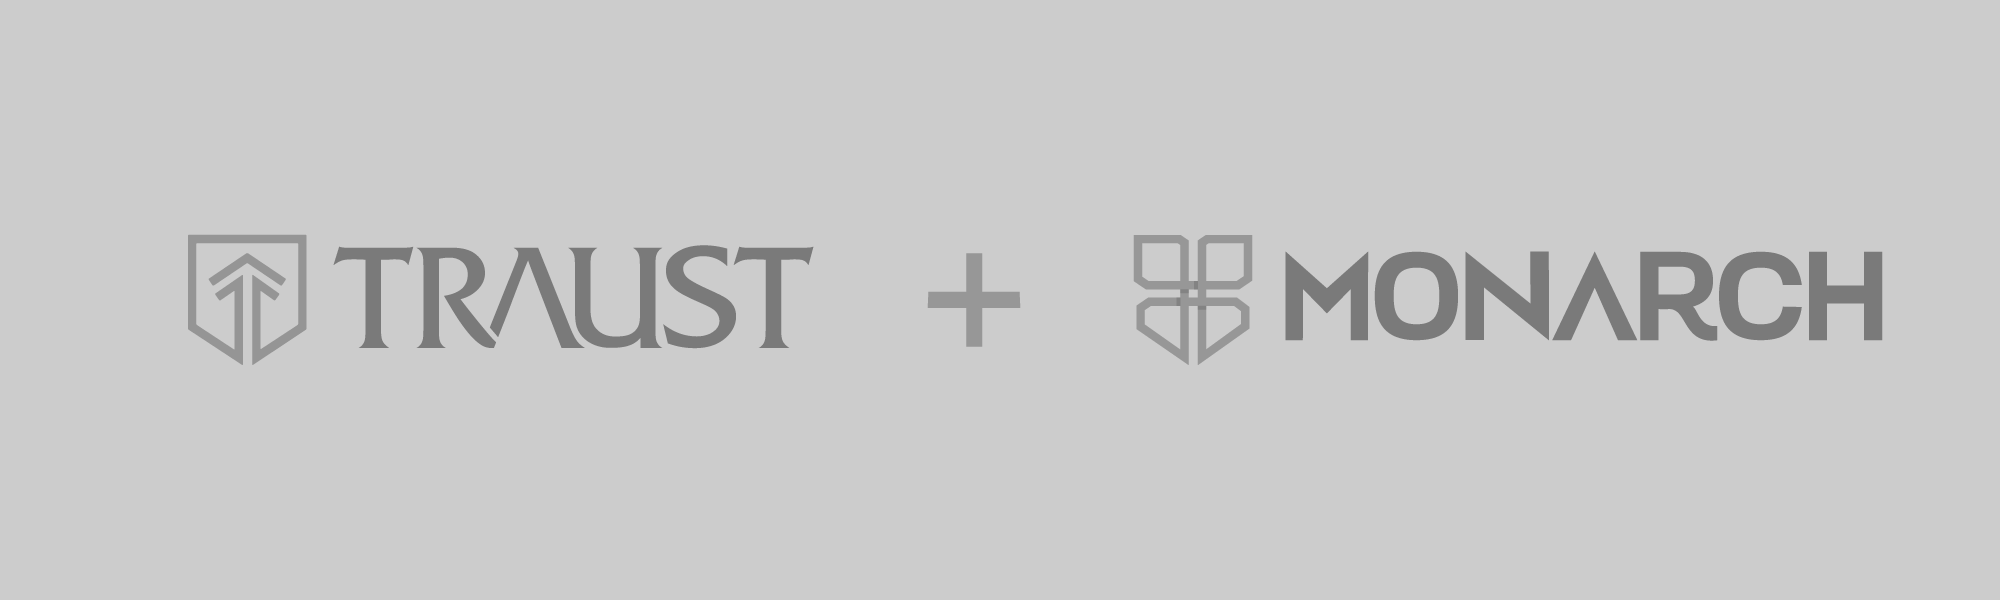 Traust Announces Strategic Alliance with The Monarch Collective to Expand Services in Europe